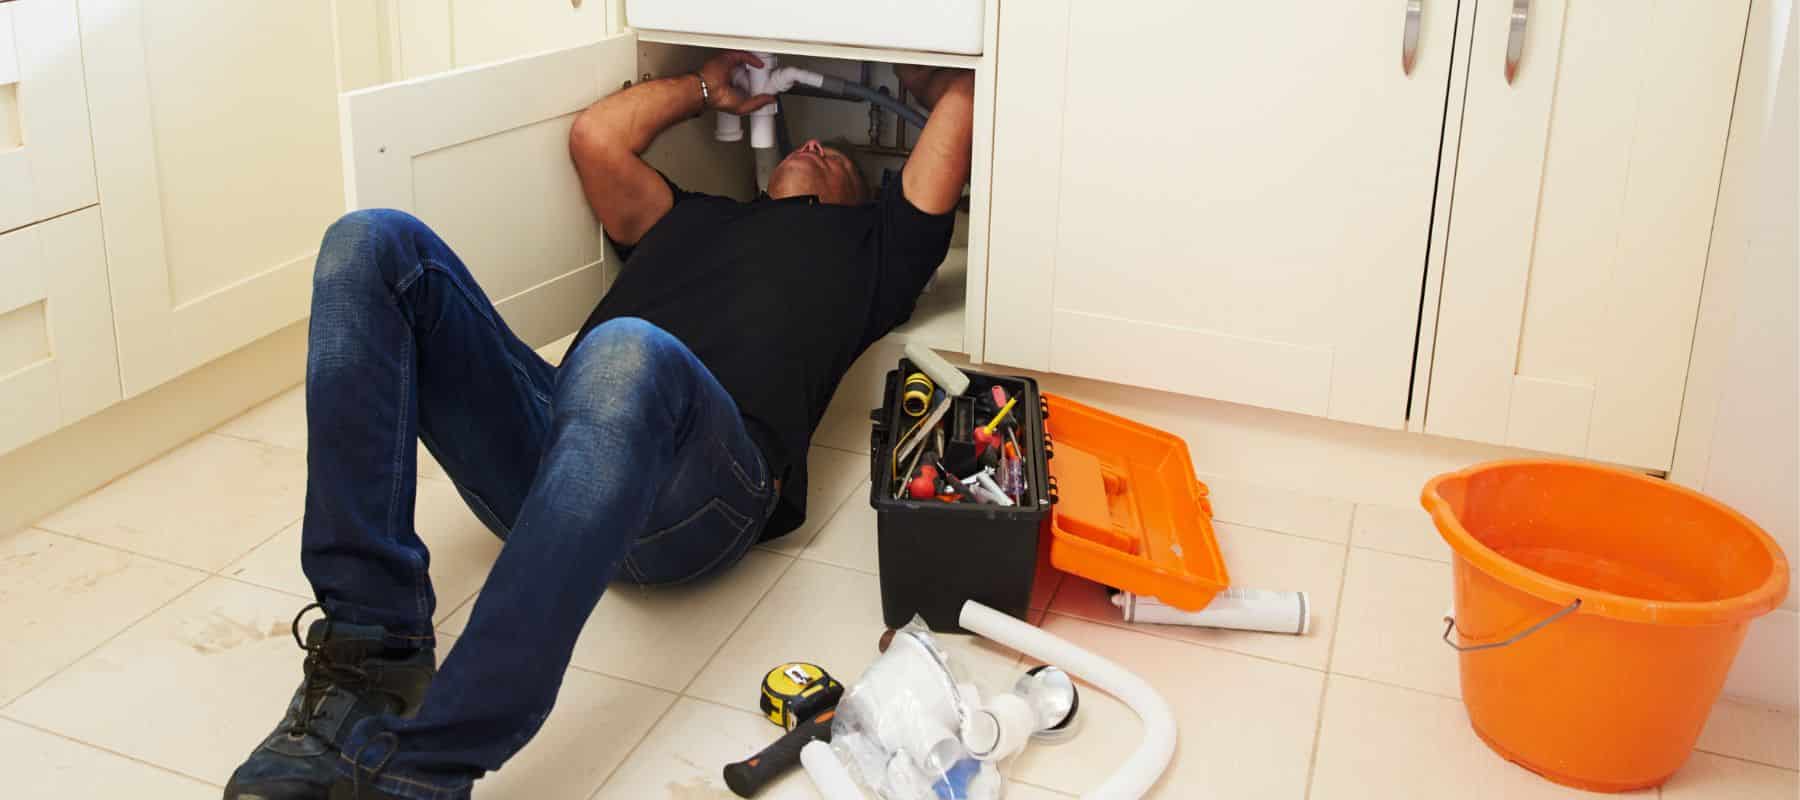 service squad plumber inspecting the plumbing under a sink